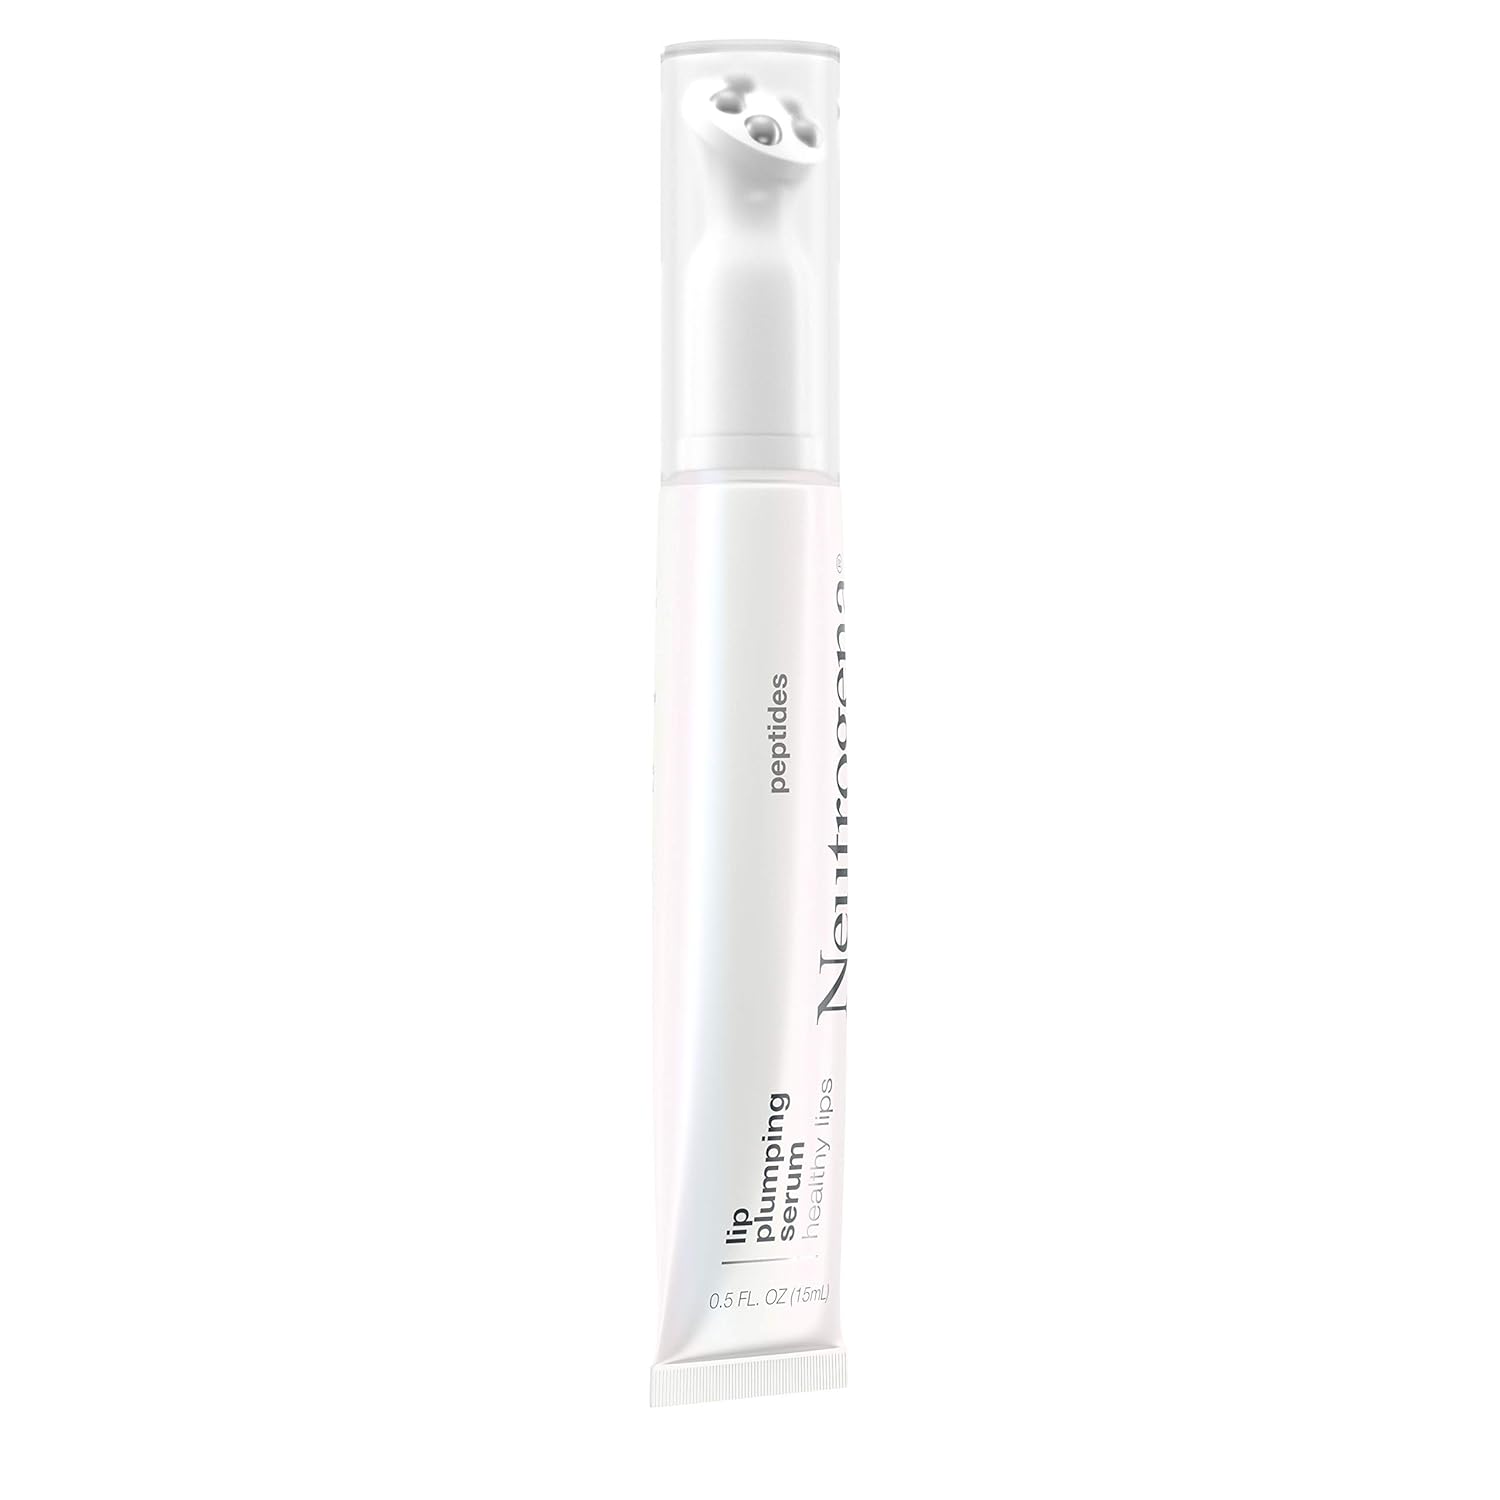 Neutrogena Healthy Lips Plumping Serum, Lip Enhancer with Peptides Nourishes and Promotes the Appearance of Naturally Fuller and Plumper-Looking Lips, 0.5 fl. oz : Beauty & Personal Care